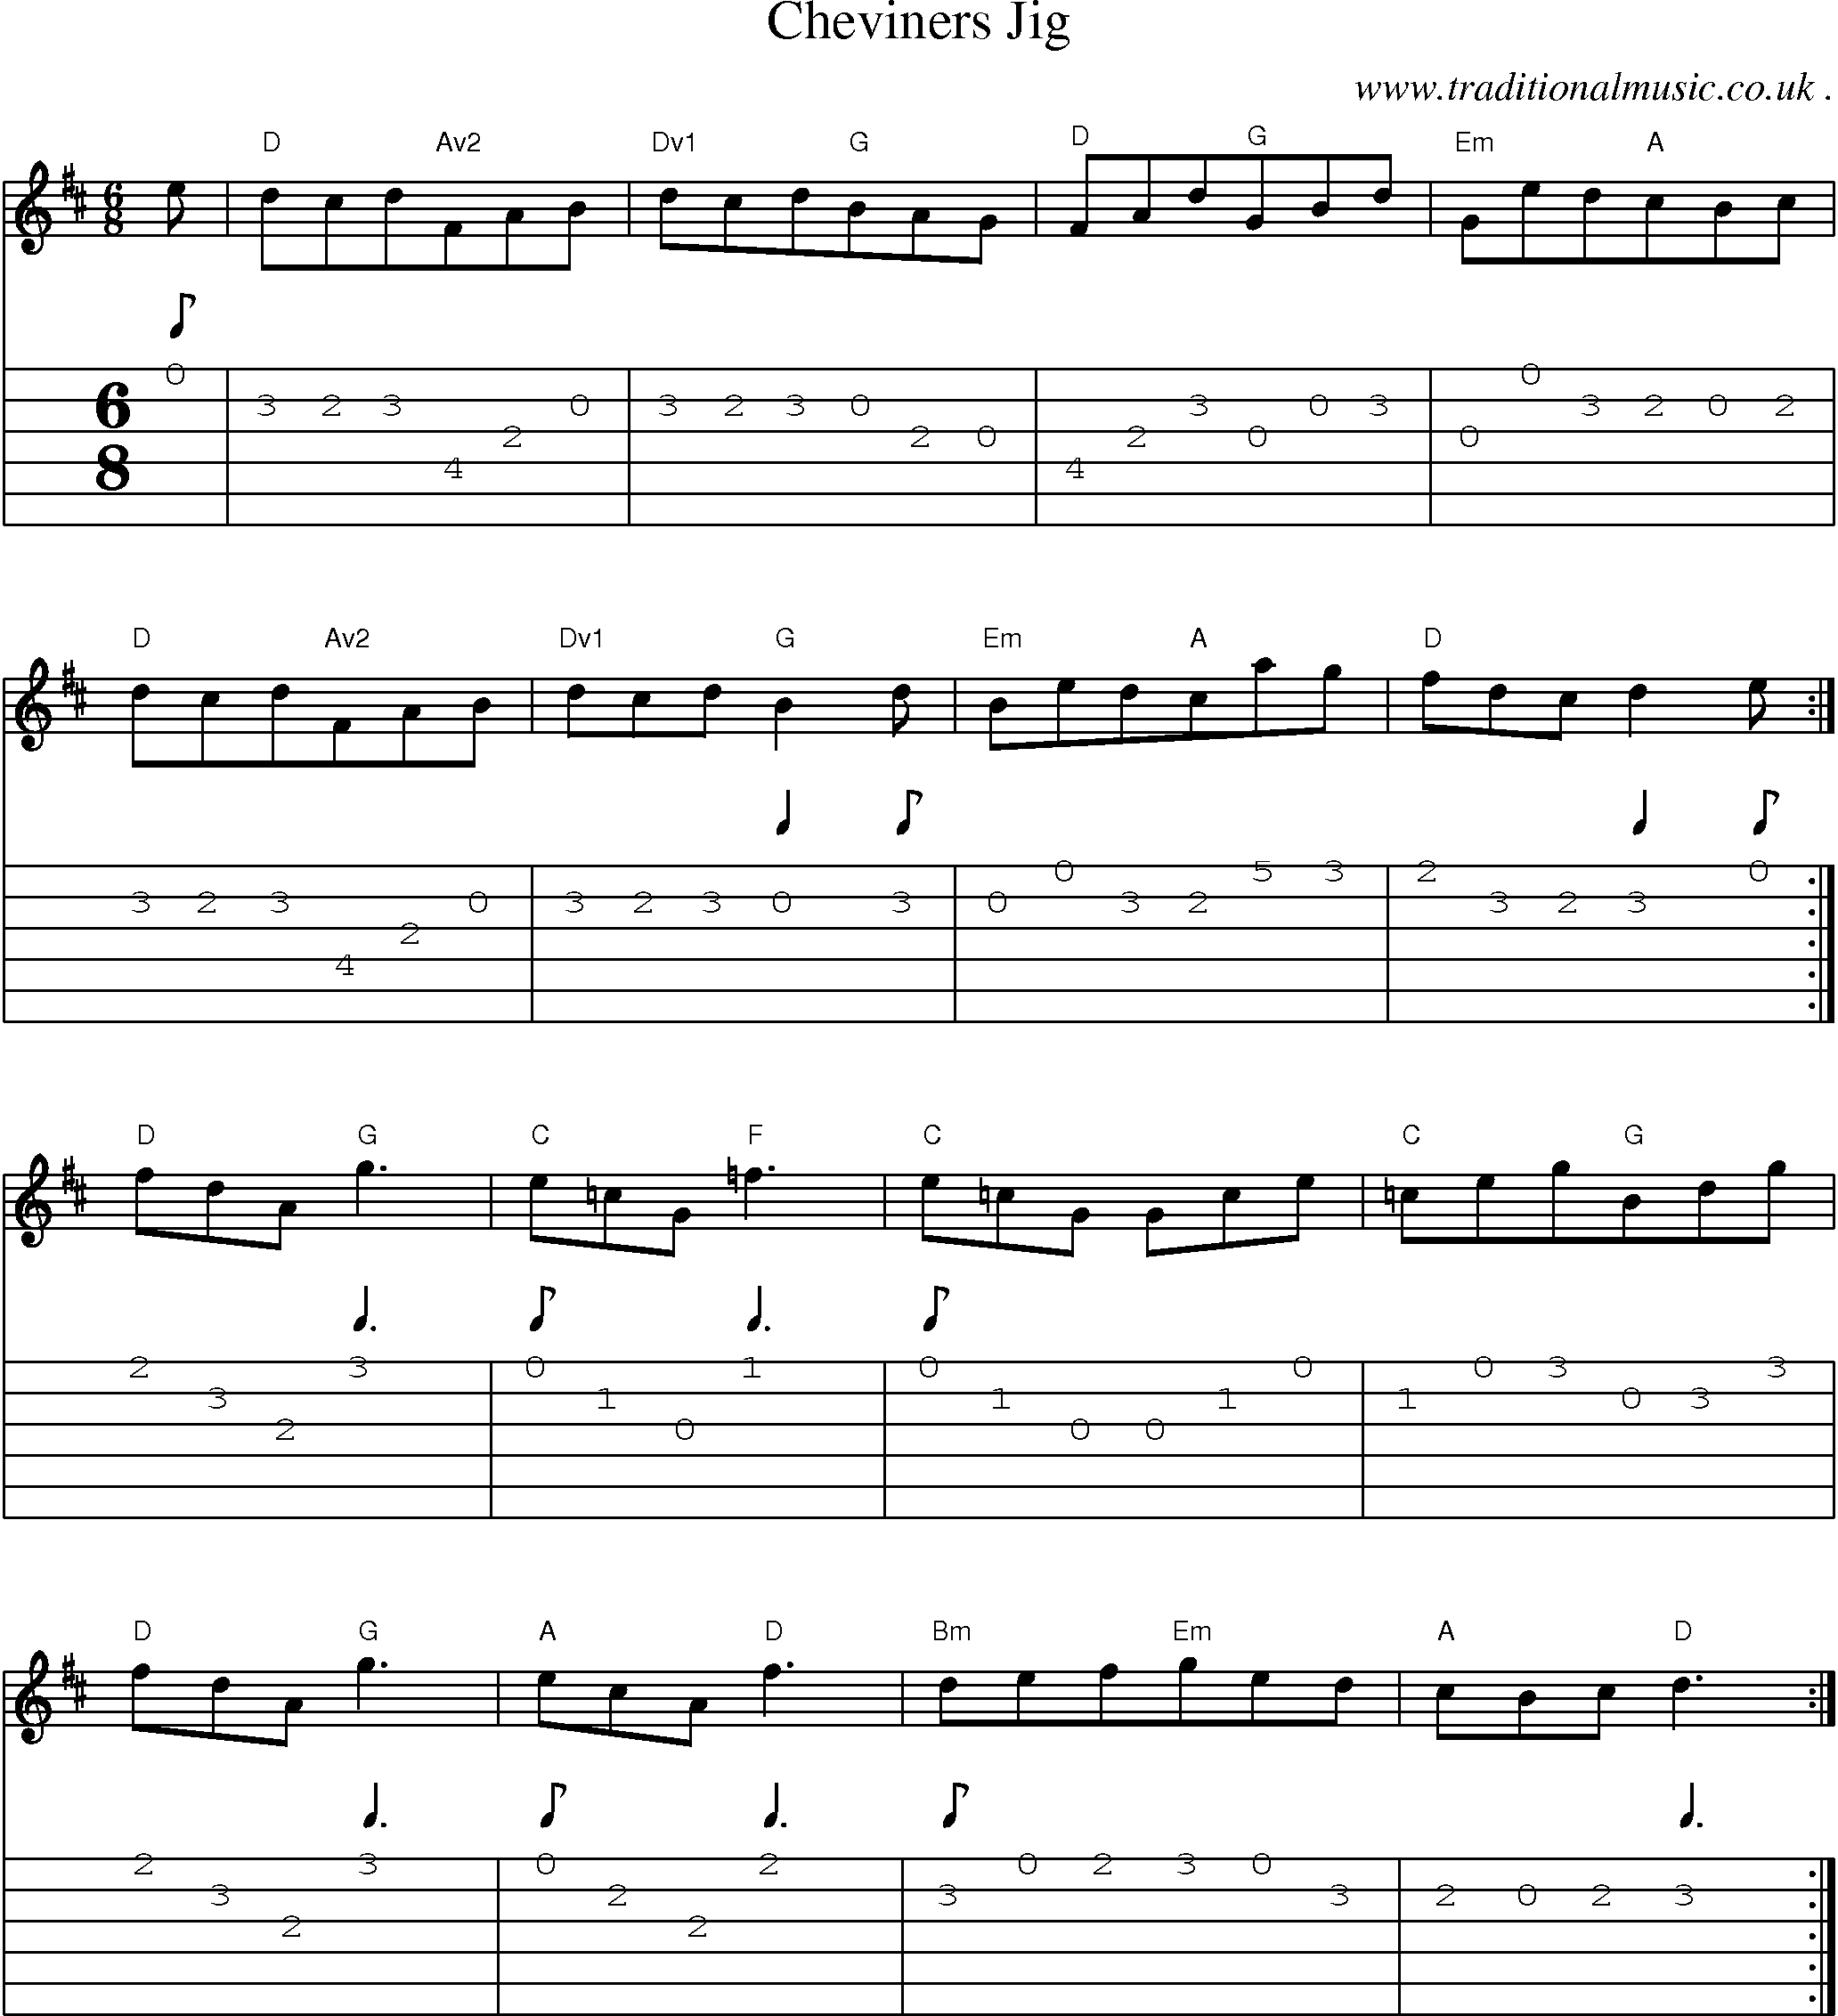 Sheet-Music and Guitar Tabs for Cheviners Jig